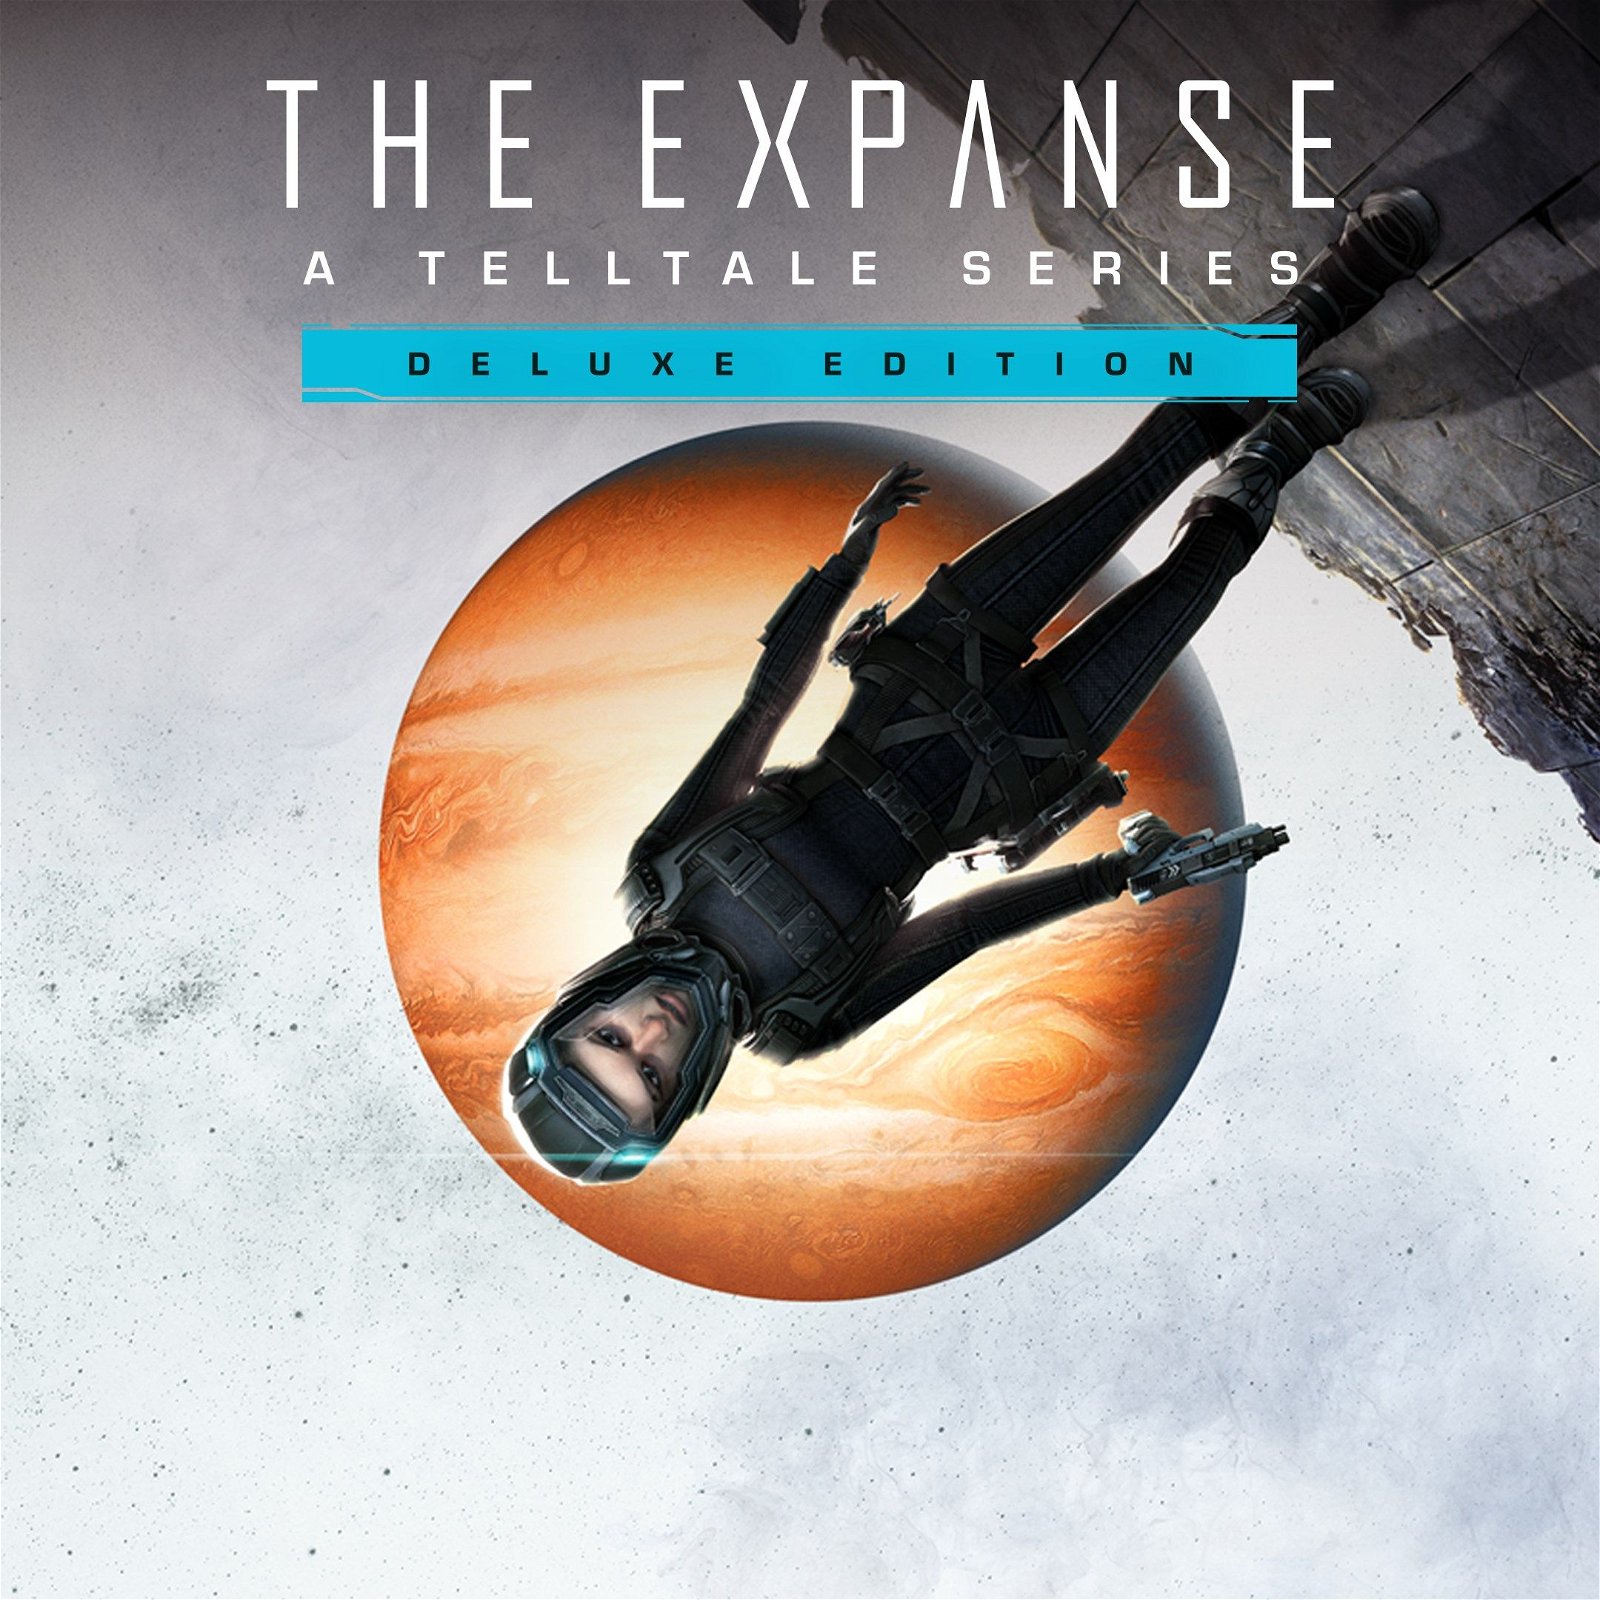 Image of The Expanse: A Telltale Series - Deluxe Edition